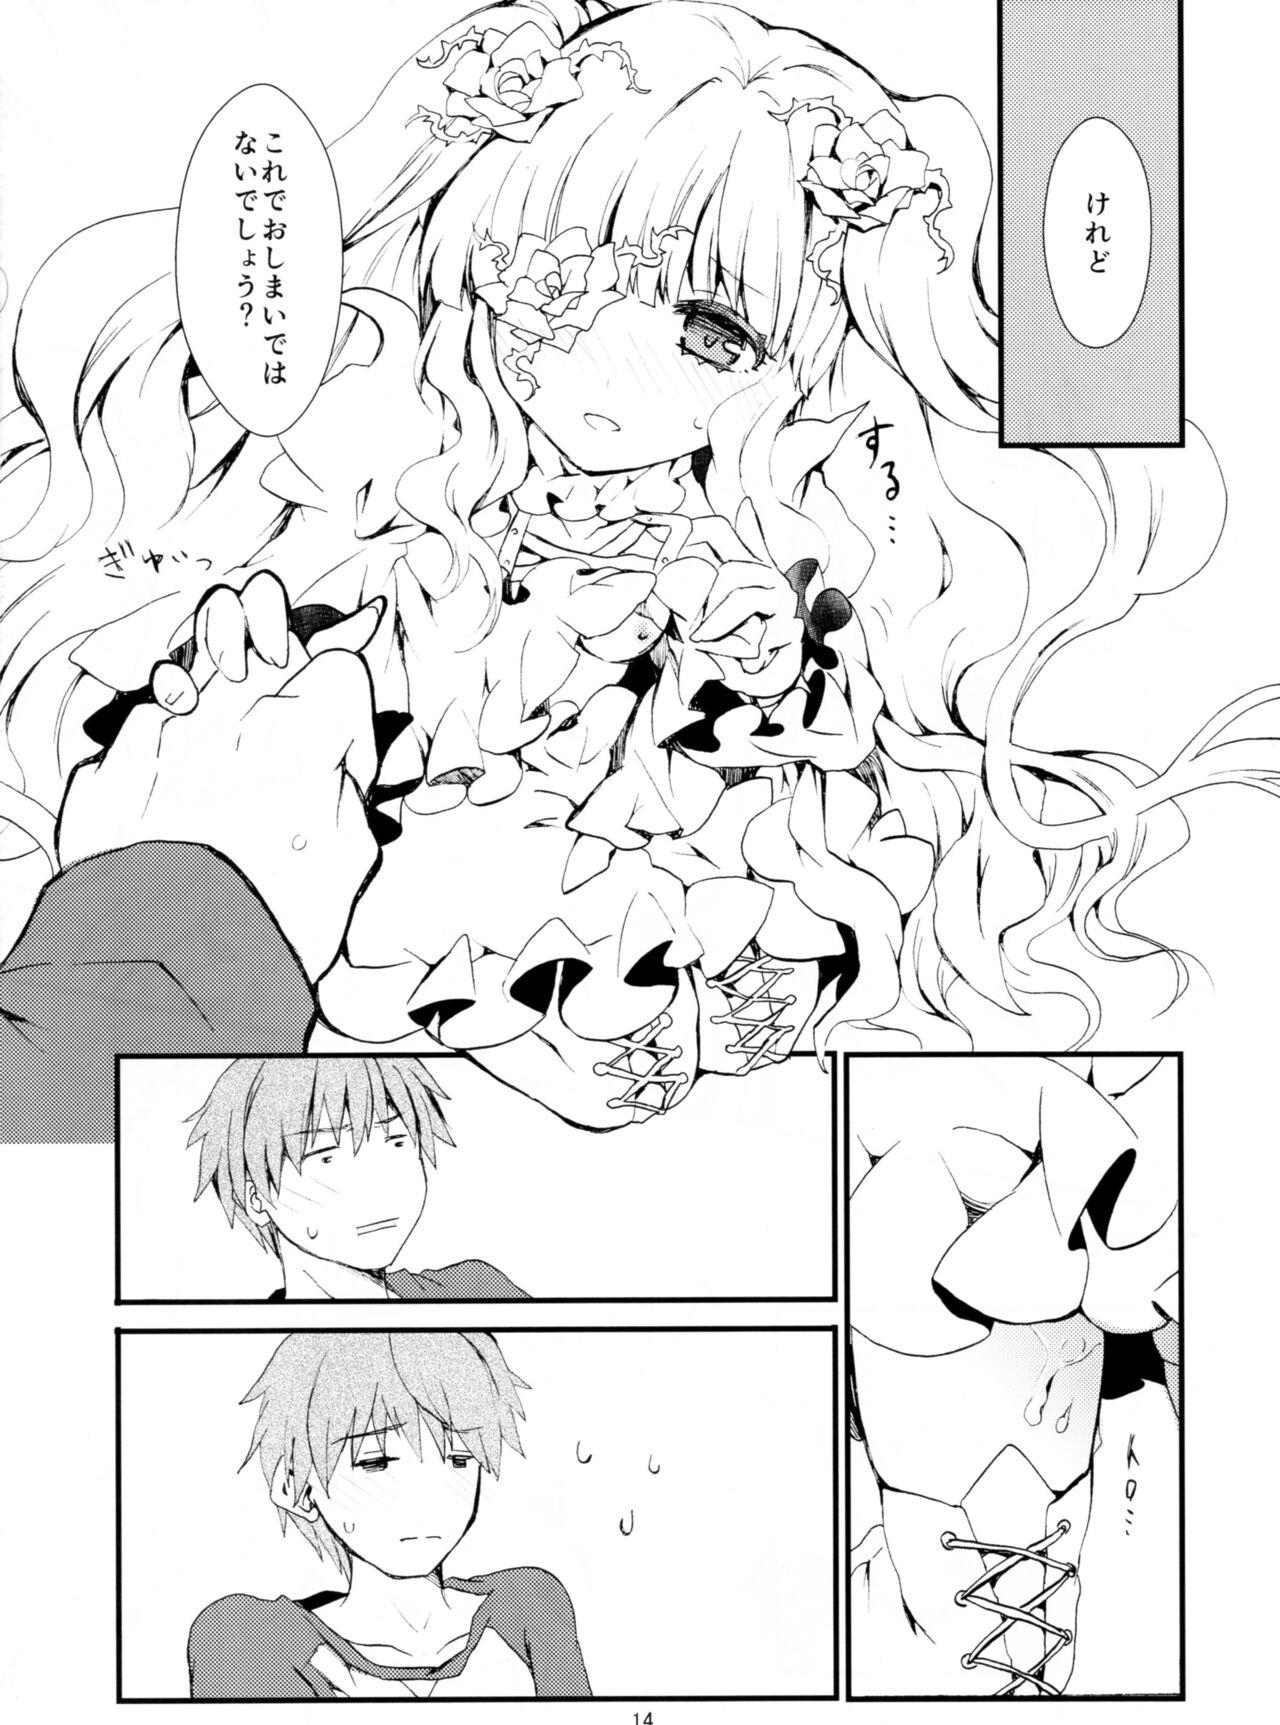 Costume Eat me, Drink me - Rozen maiden Tribute - Page 11